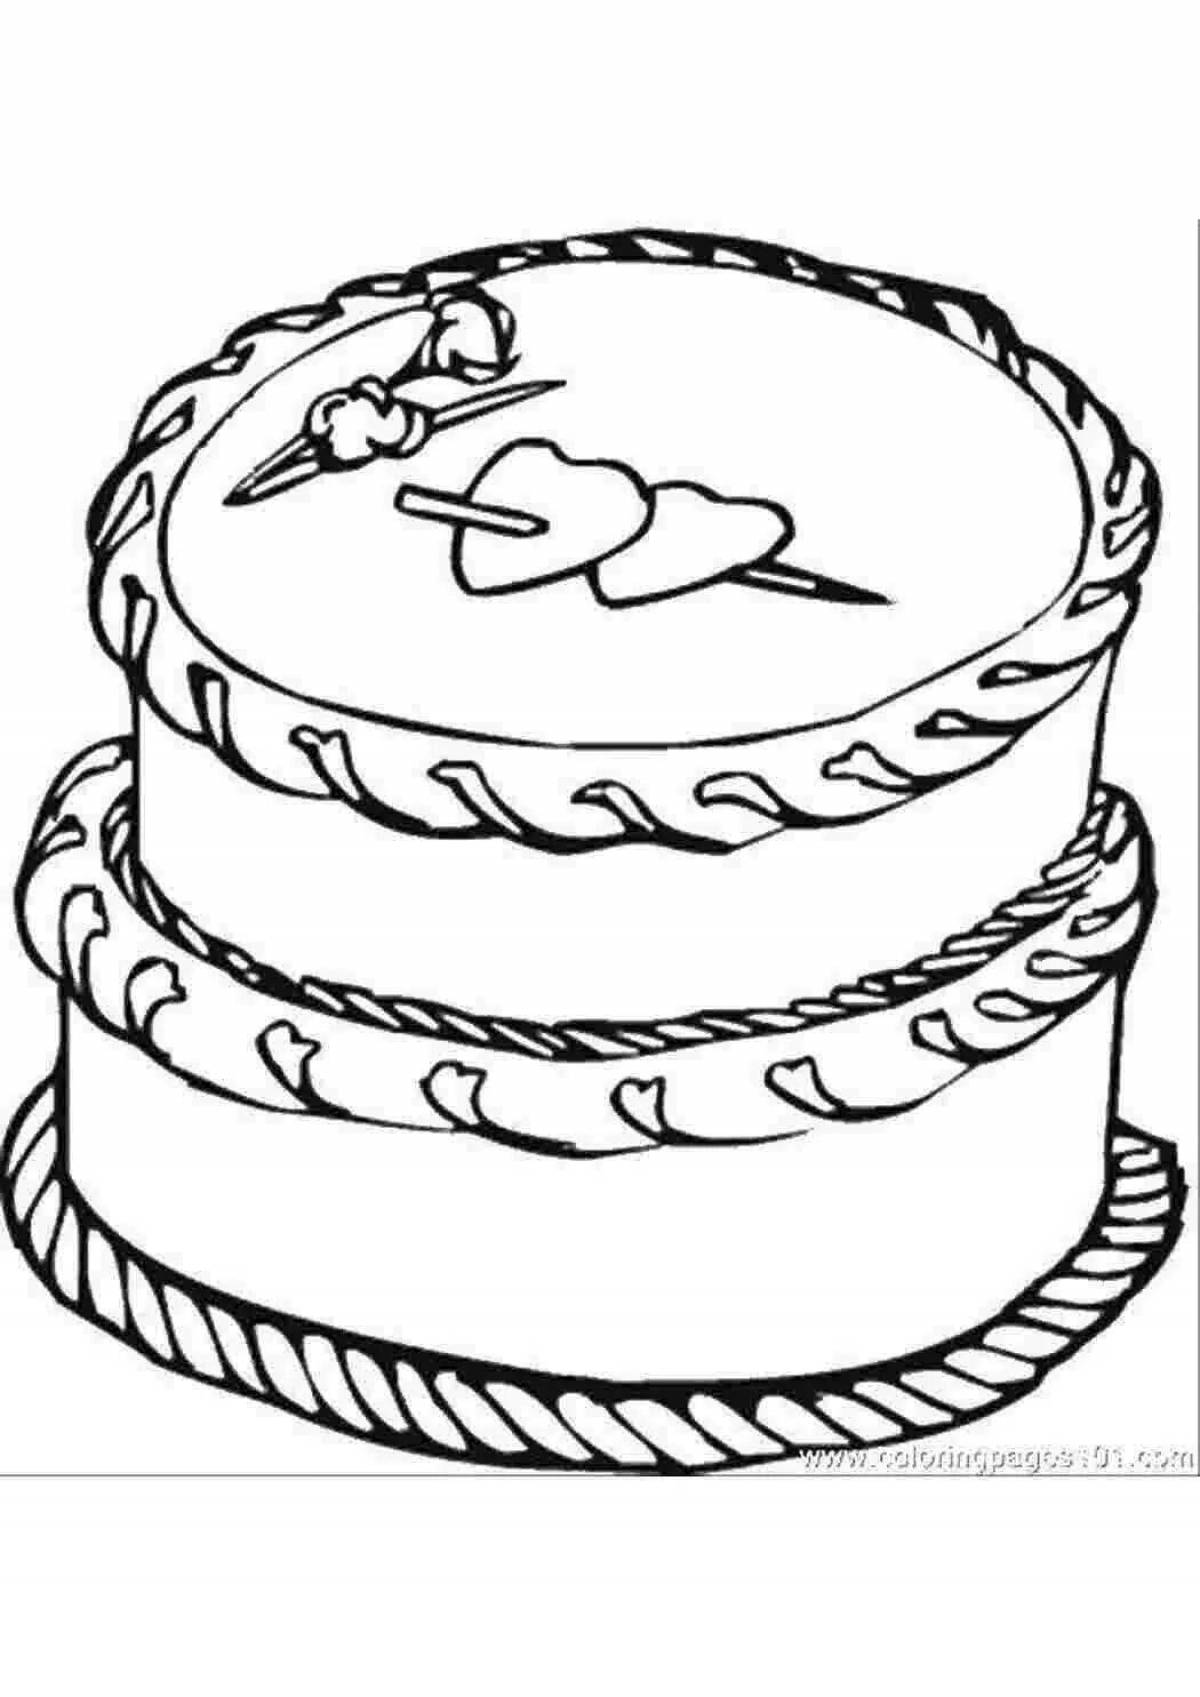 Rich chocolate cake coloring page